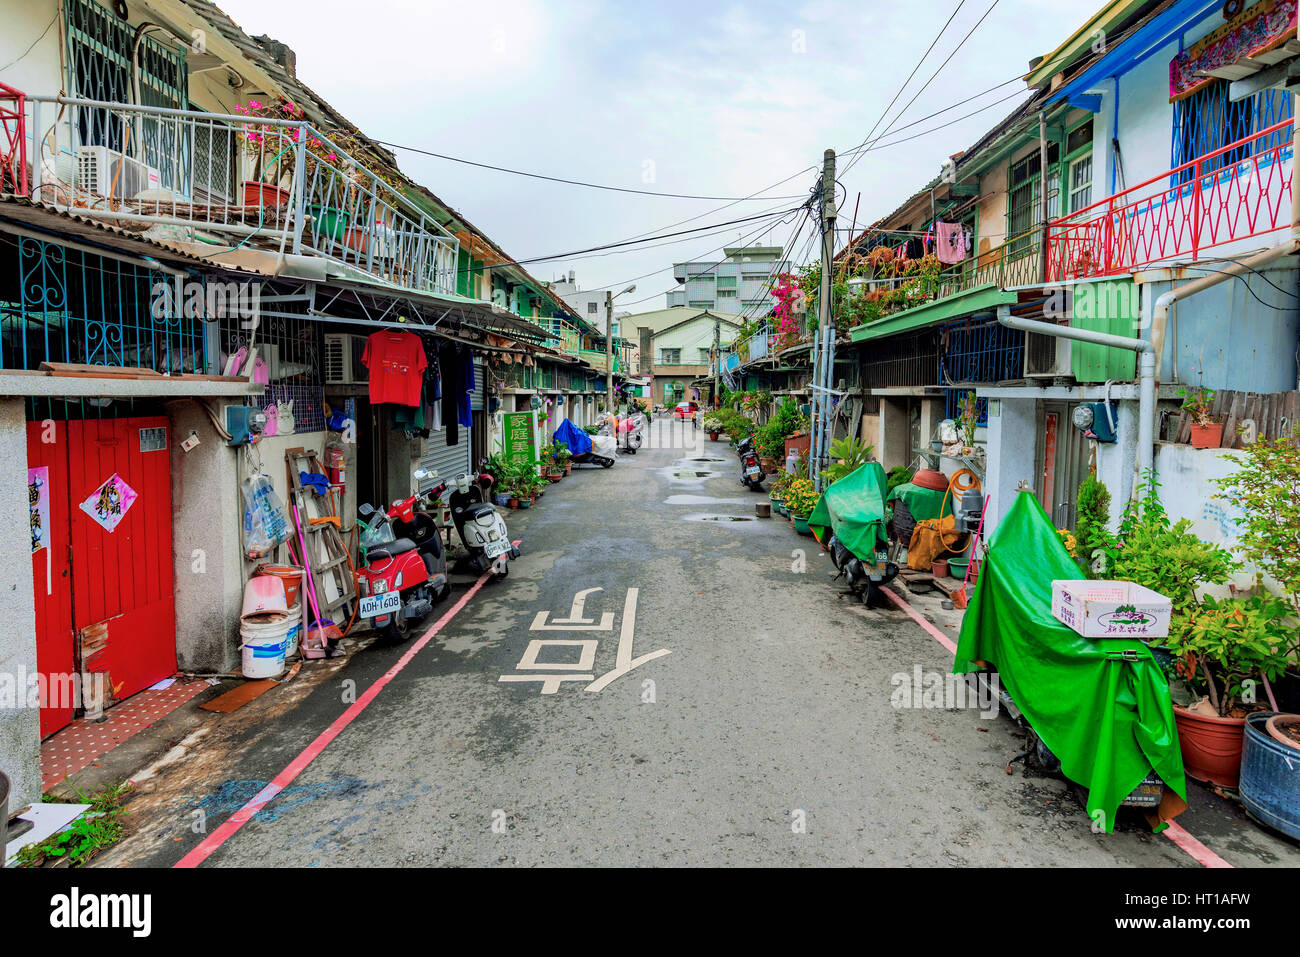 CHIAYI, TAIWAN - NOVEMBER 22: This is an old residential housing area in the suburbs of Chiayi city on November 22, 2016 in Chiayi Stock Photo